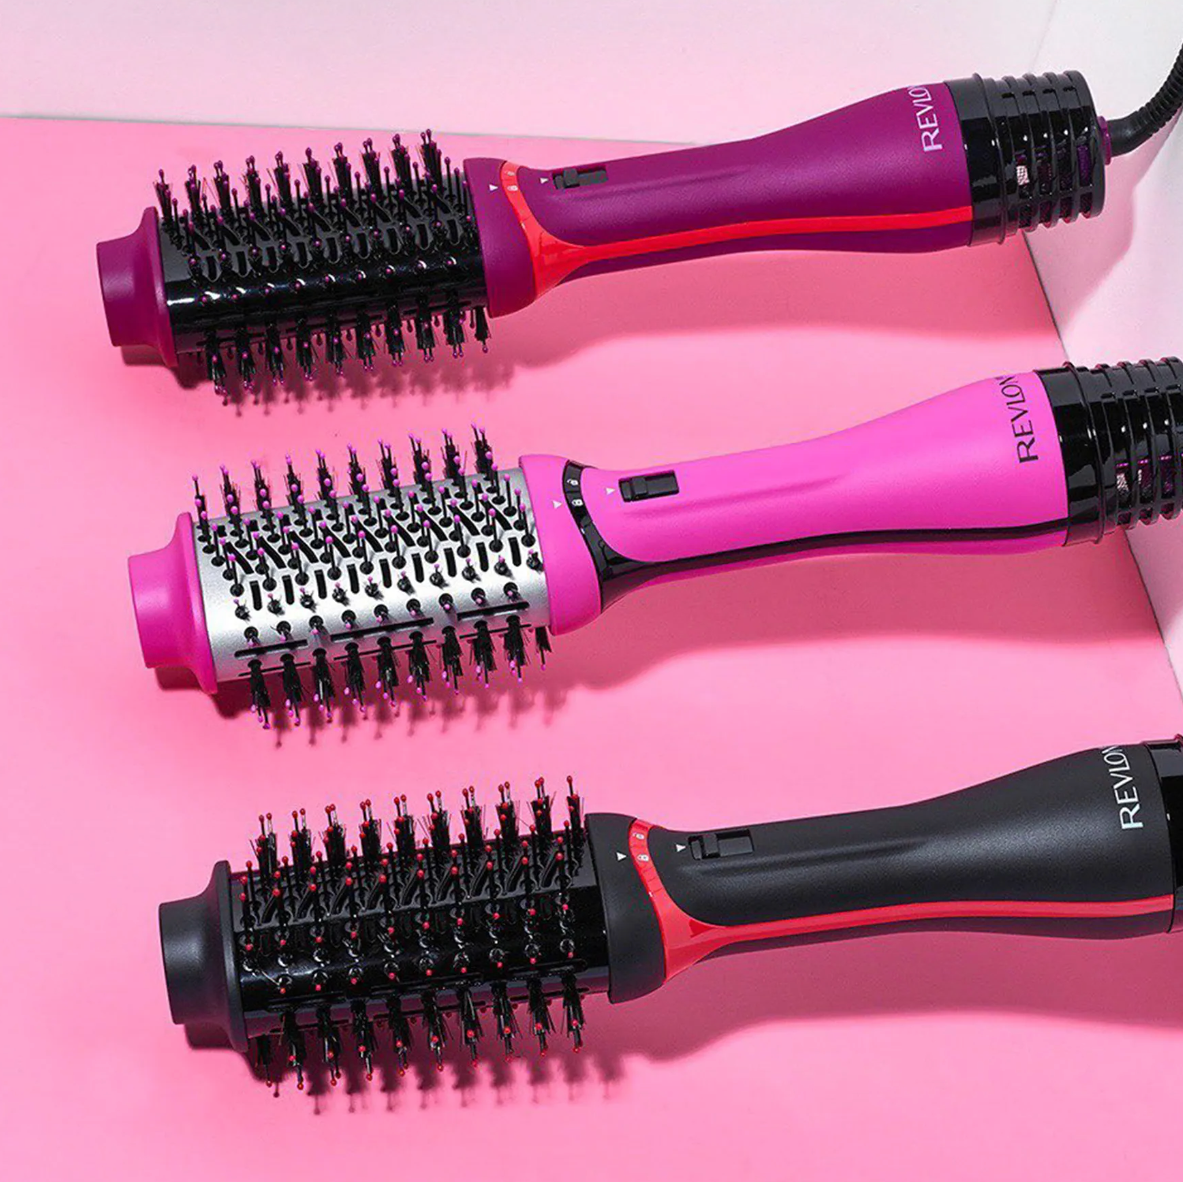 Revlon hair dryer brush review - is it the affordable alternative to Dyson?